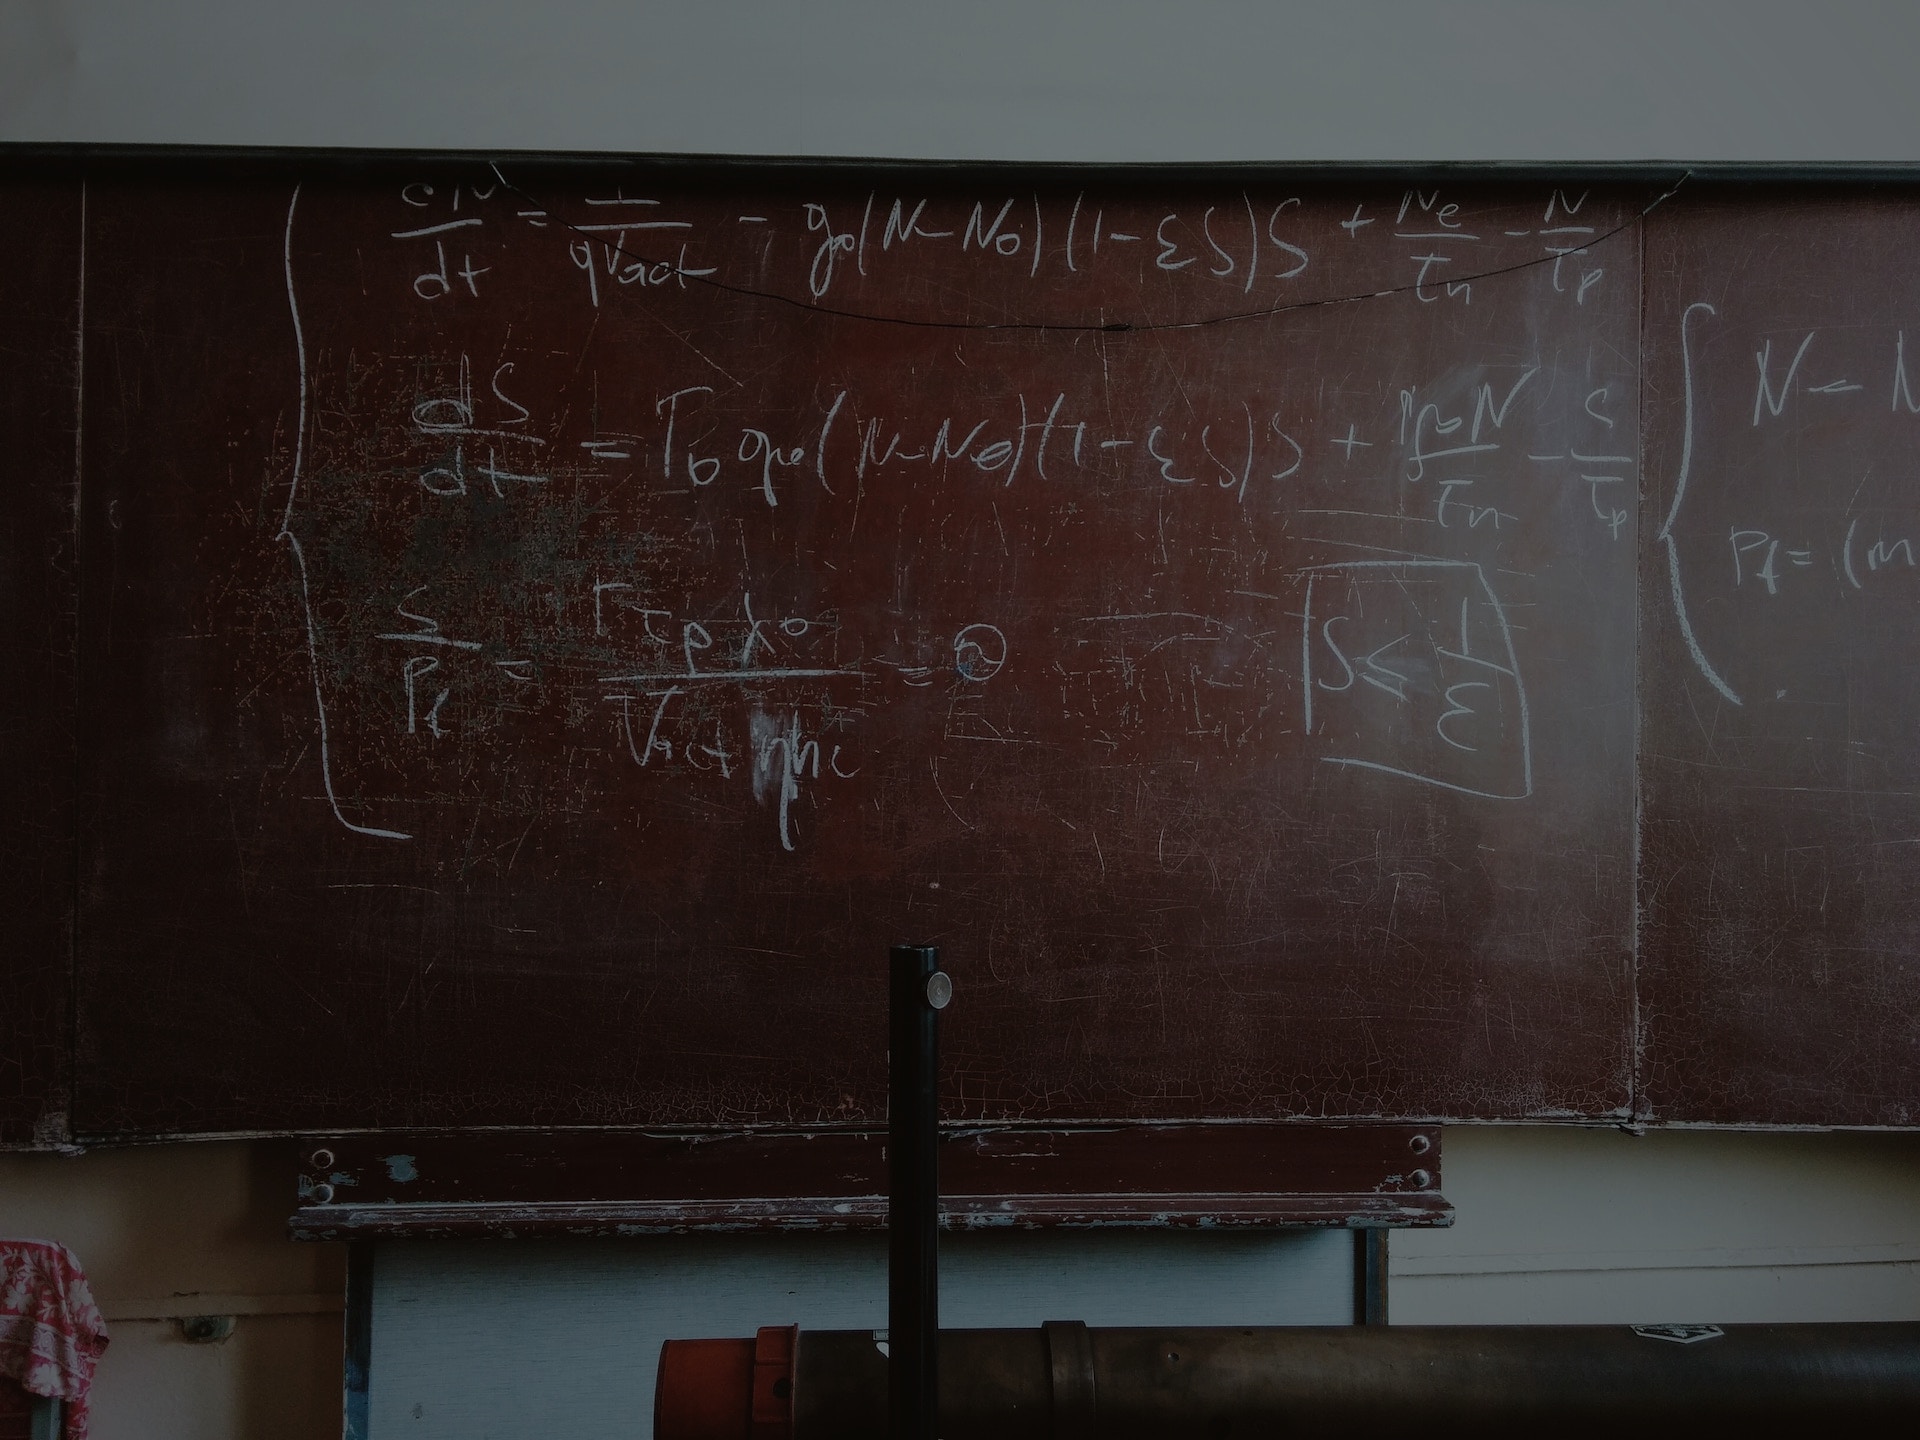 Picture of a blackboard showing calculus